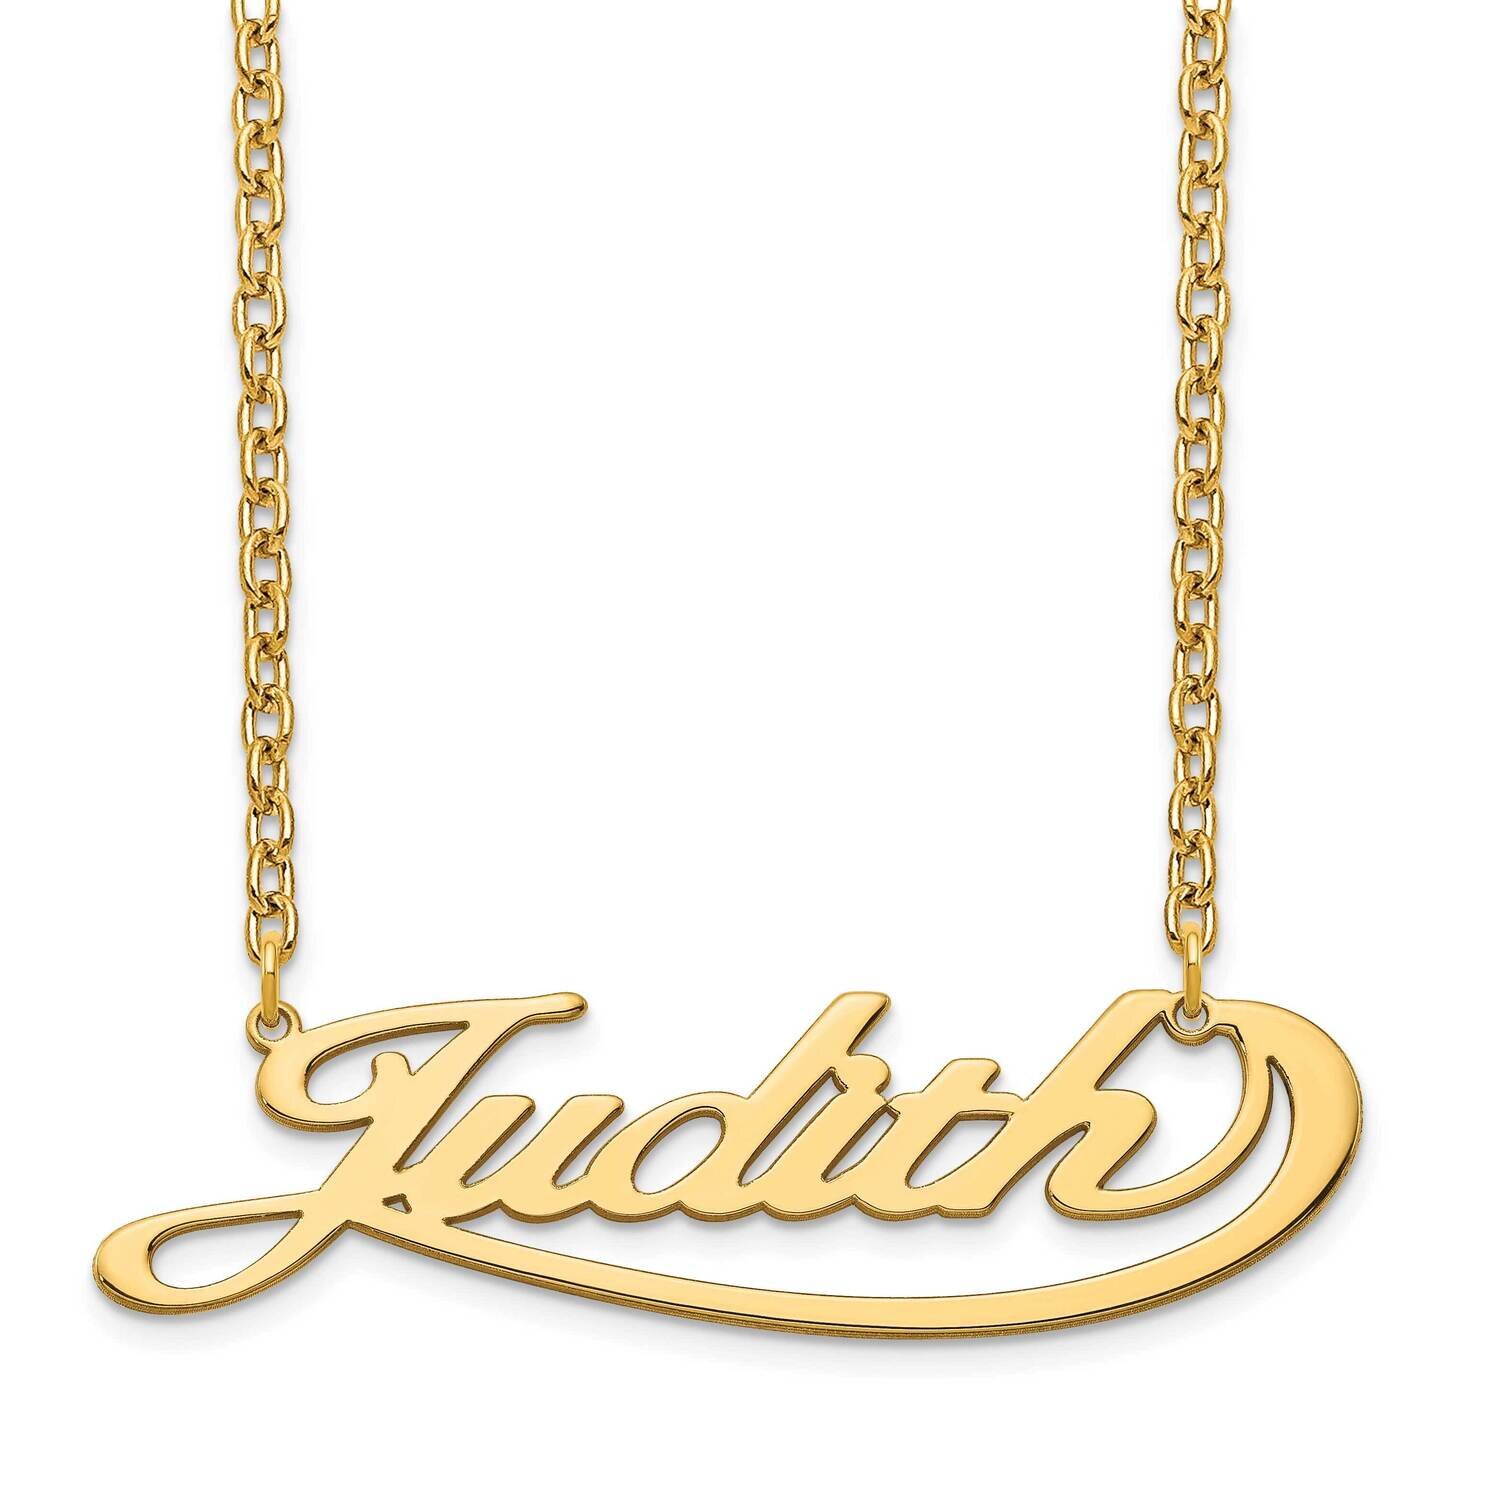 Under Swoop Nameplate Necklace Gold-plated XNA945GP